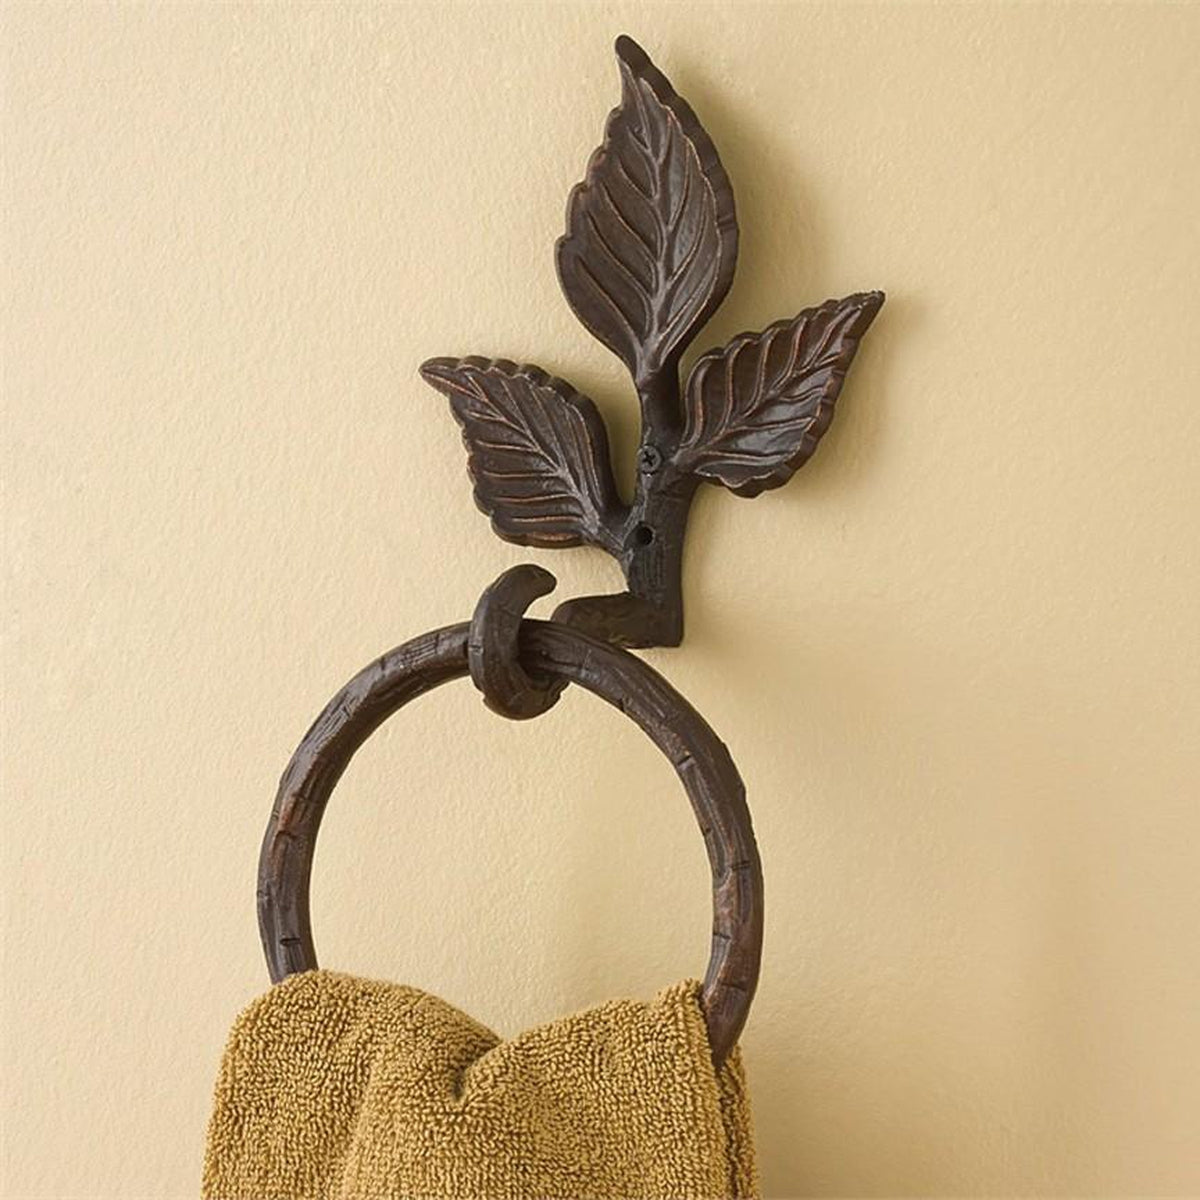 Wrought Iron Towel Rings - Iron Accents